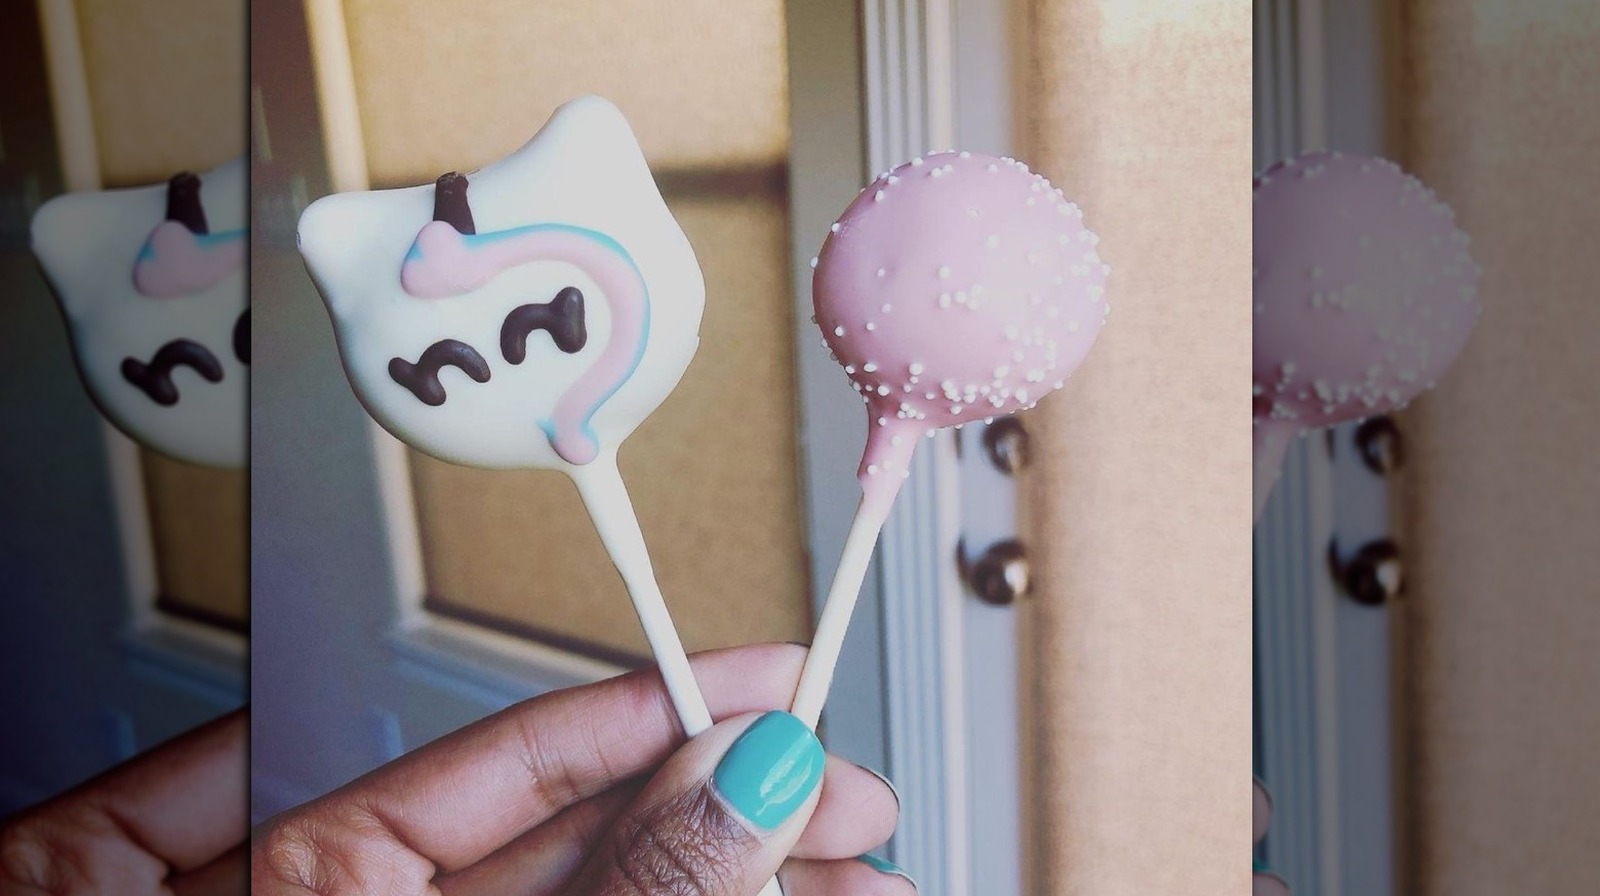 Starbucks Cake Pops: What To Know Before Ordering